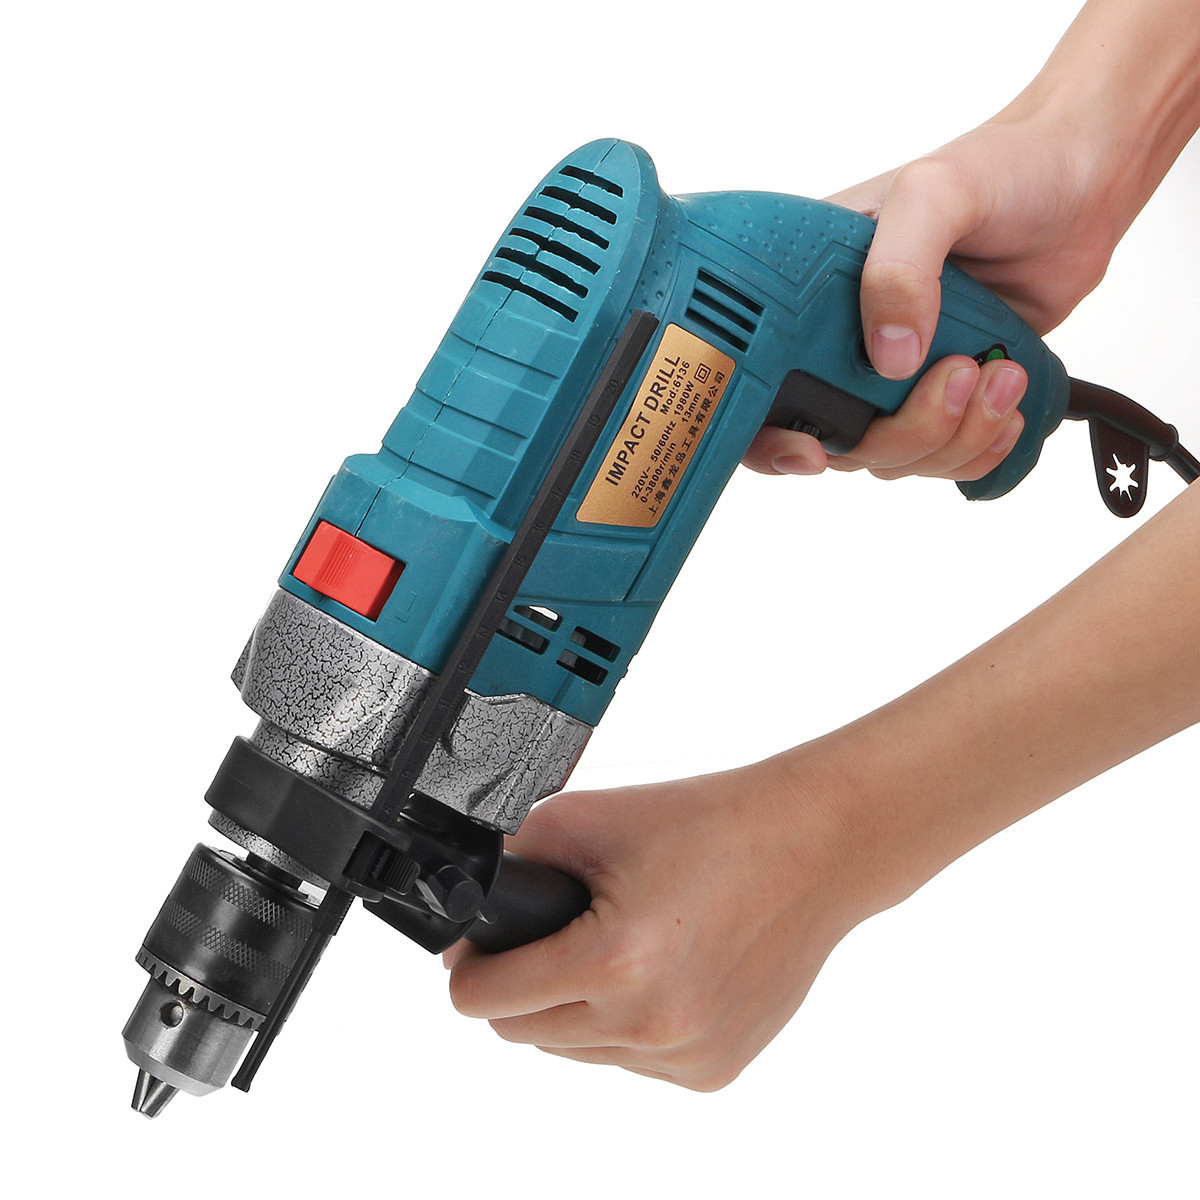 1980W-3800rpm-Electric-Impact-Drill-360deg-Rotary-Skid-Proof-Handle-With-Depth-Measuring-Scale-Spina-1715301-11